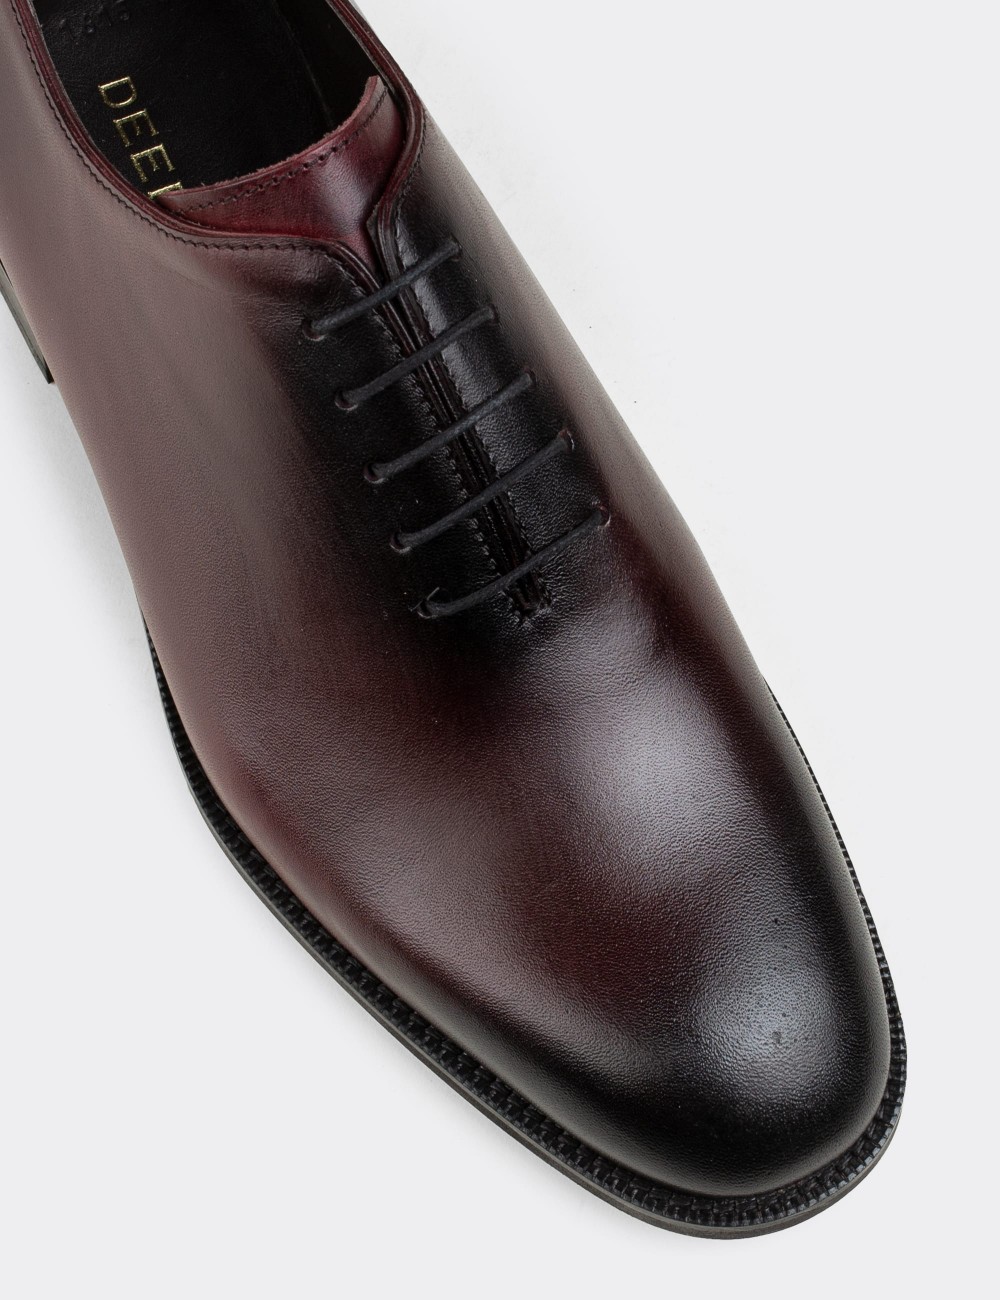 Burgundy  Leather Classic Shoes - 01830MBRDN02